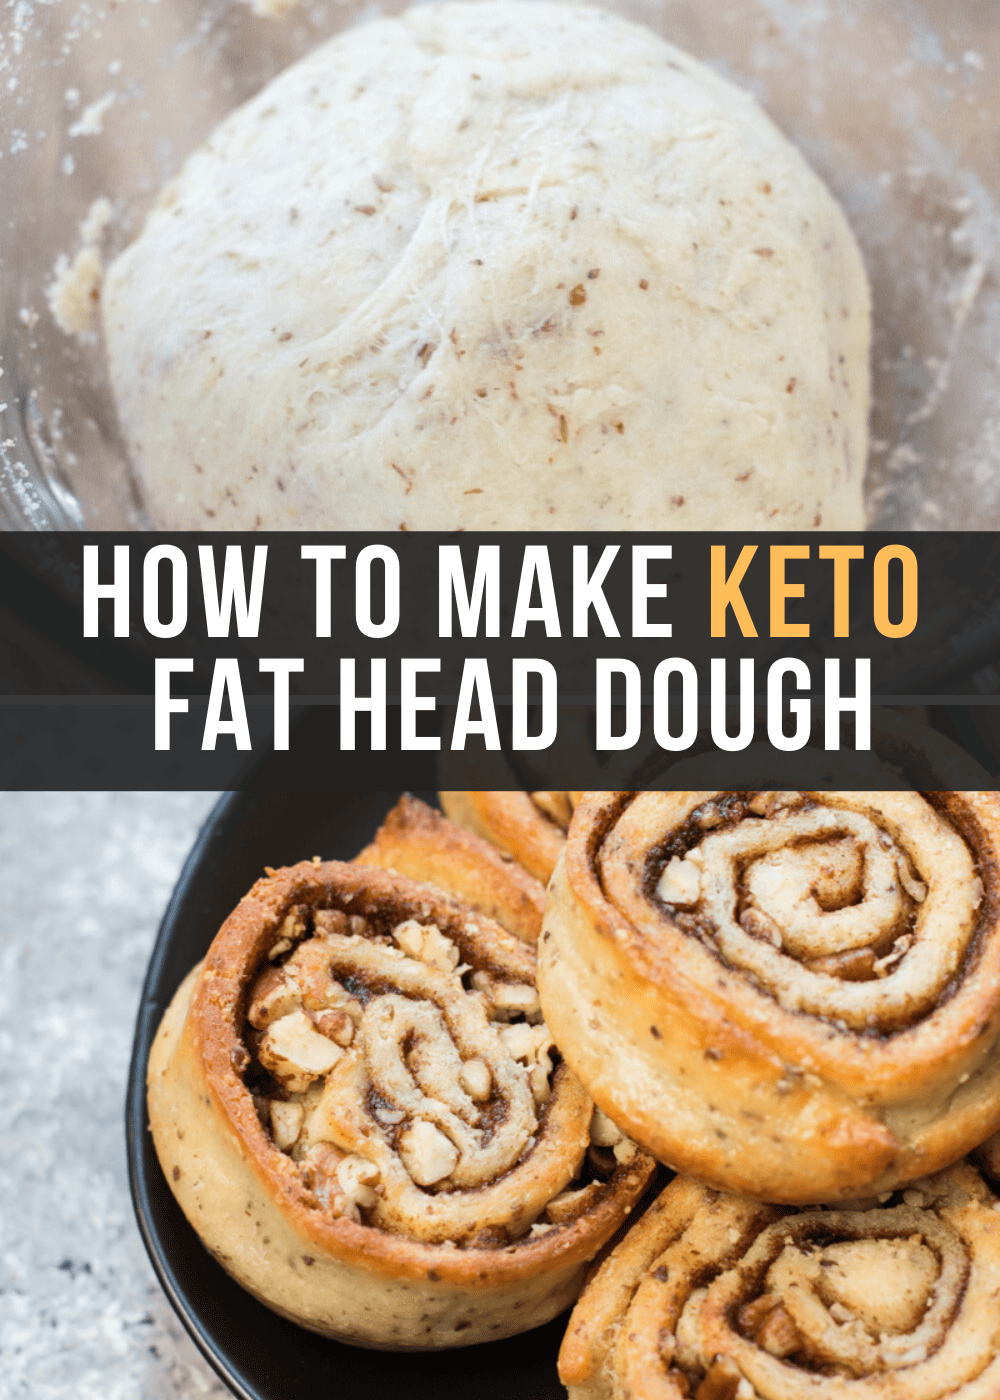 Learn how to make Keto Fat Head Dough perfect for keto pizzas, cinnamon rolls and more! This step by step tutorial will show you exactly how to make a crispy, delicious low carb crust!  #keto